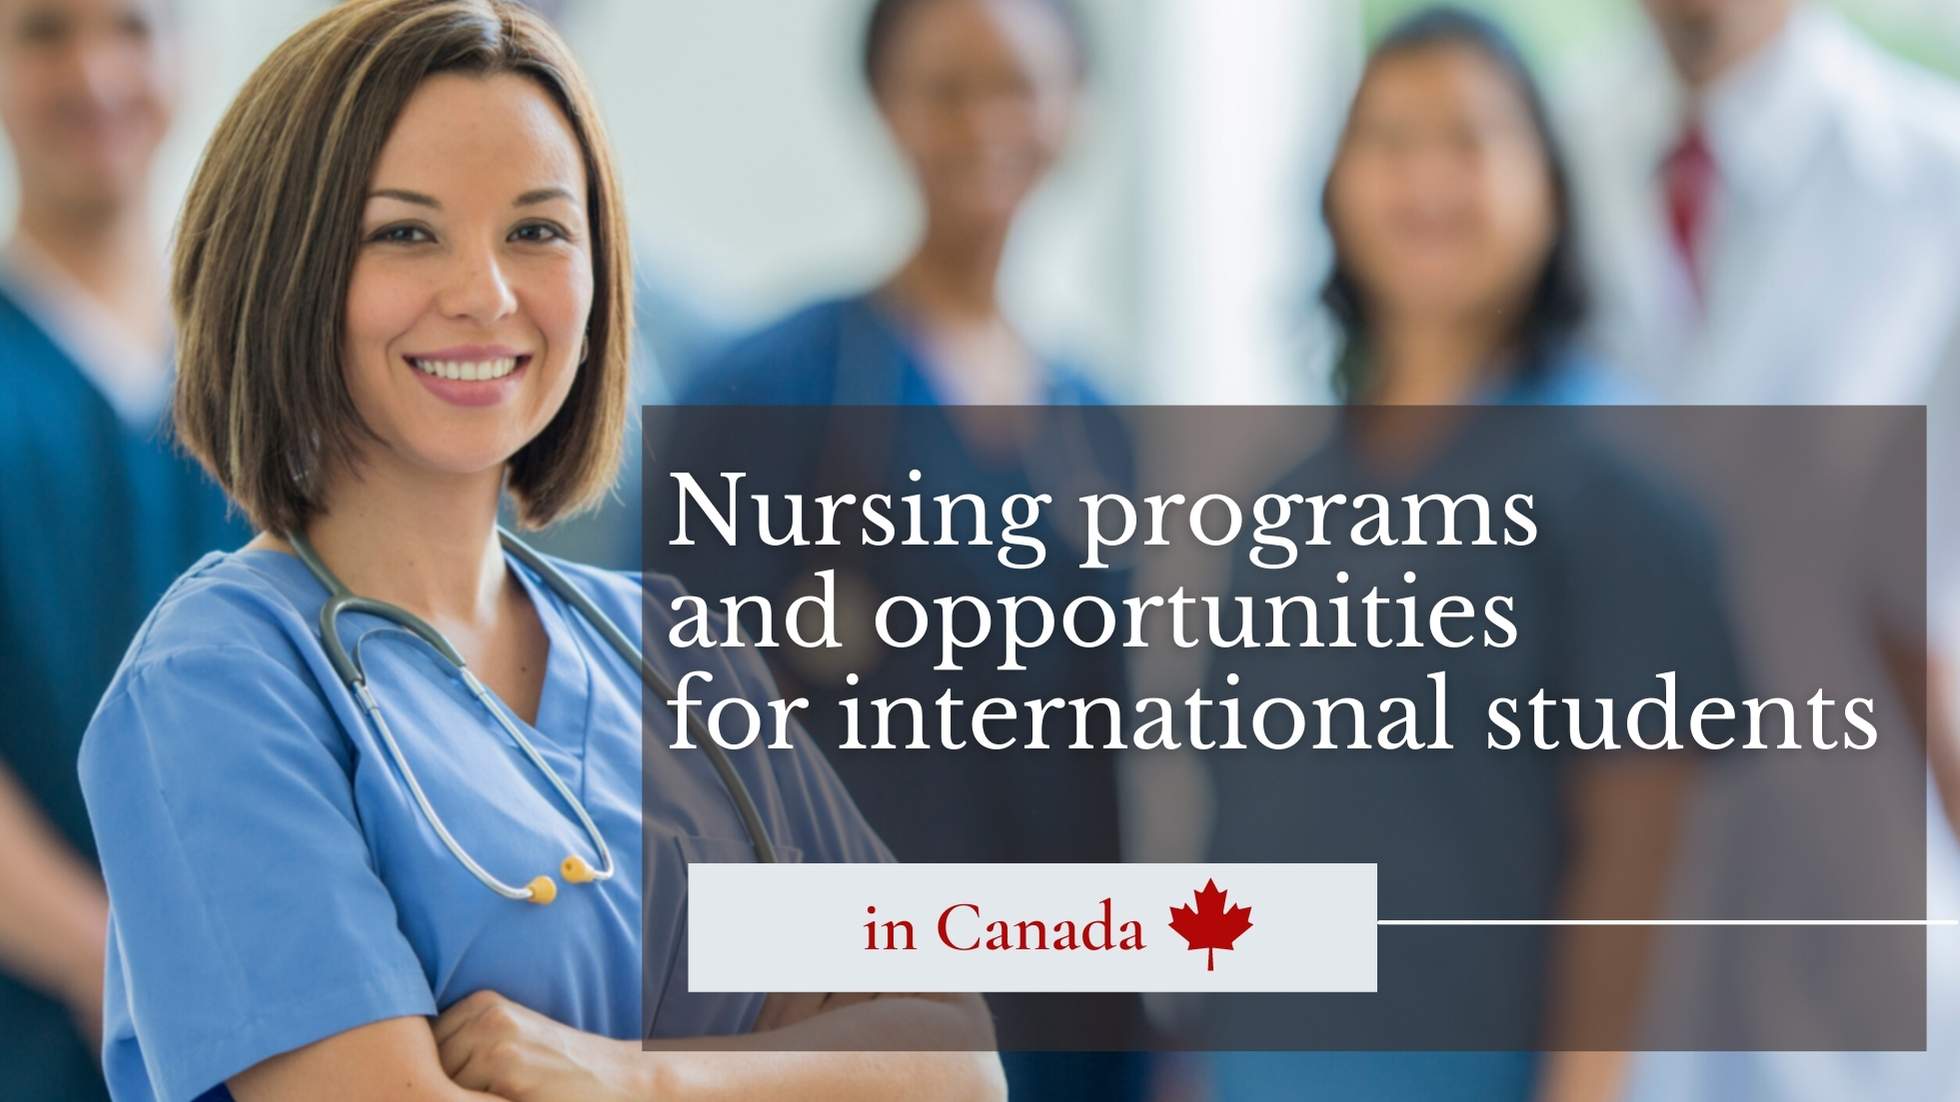 Nursing programs and opportunities for international students in Canada